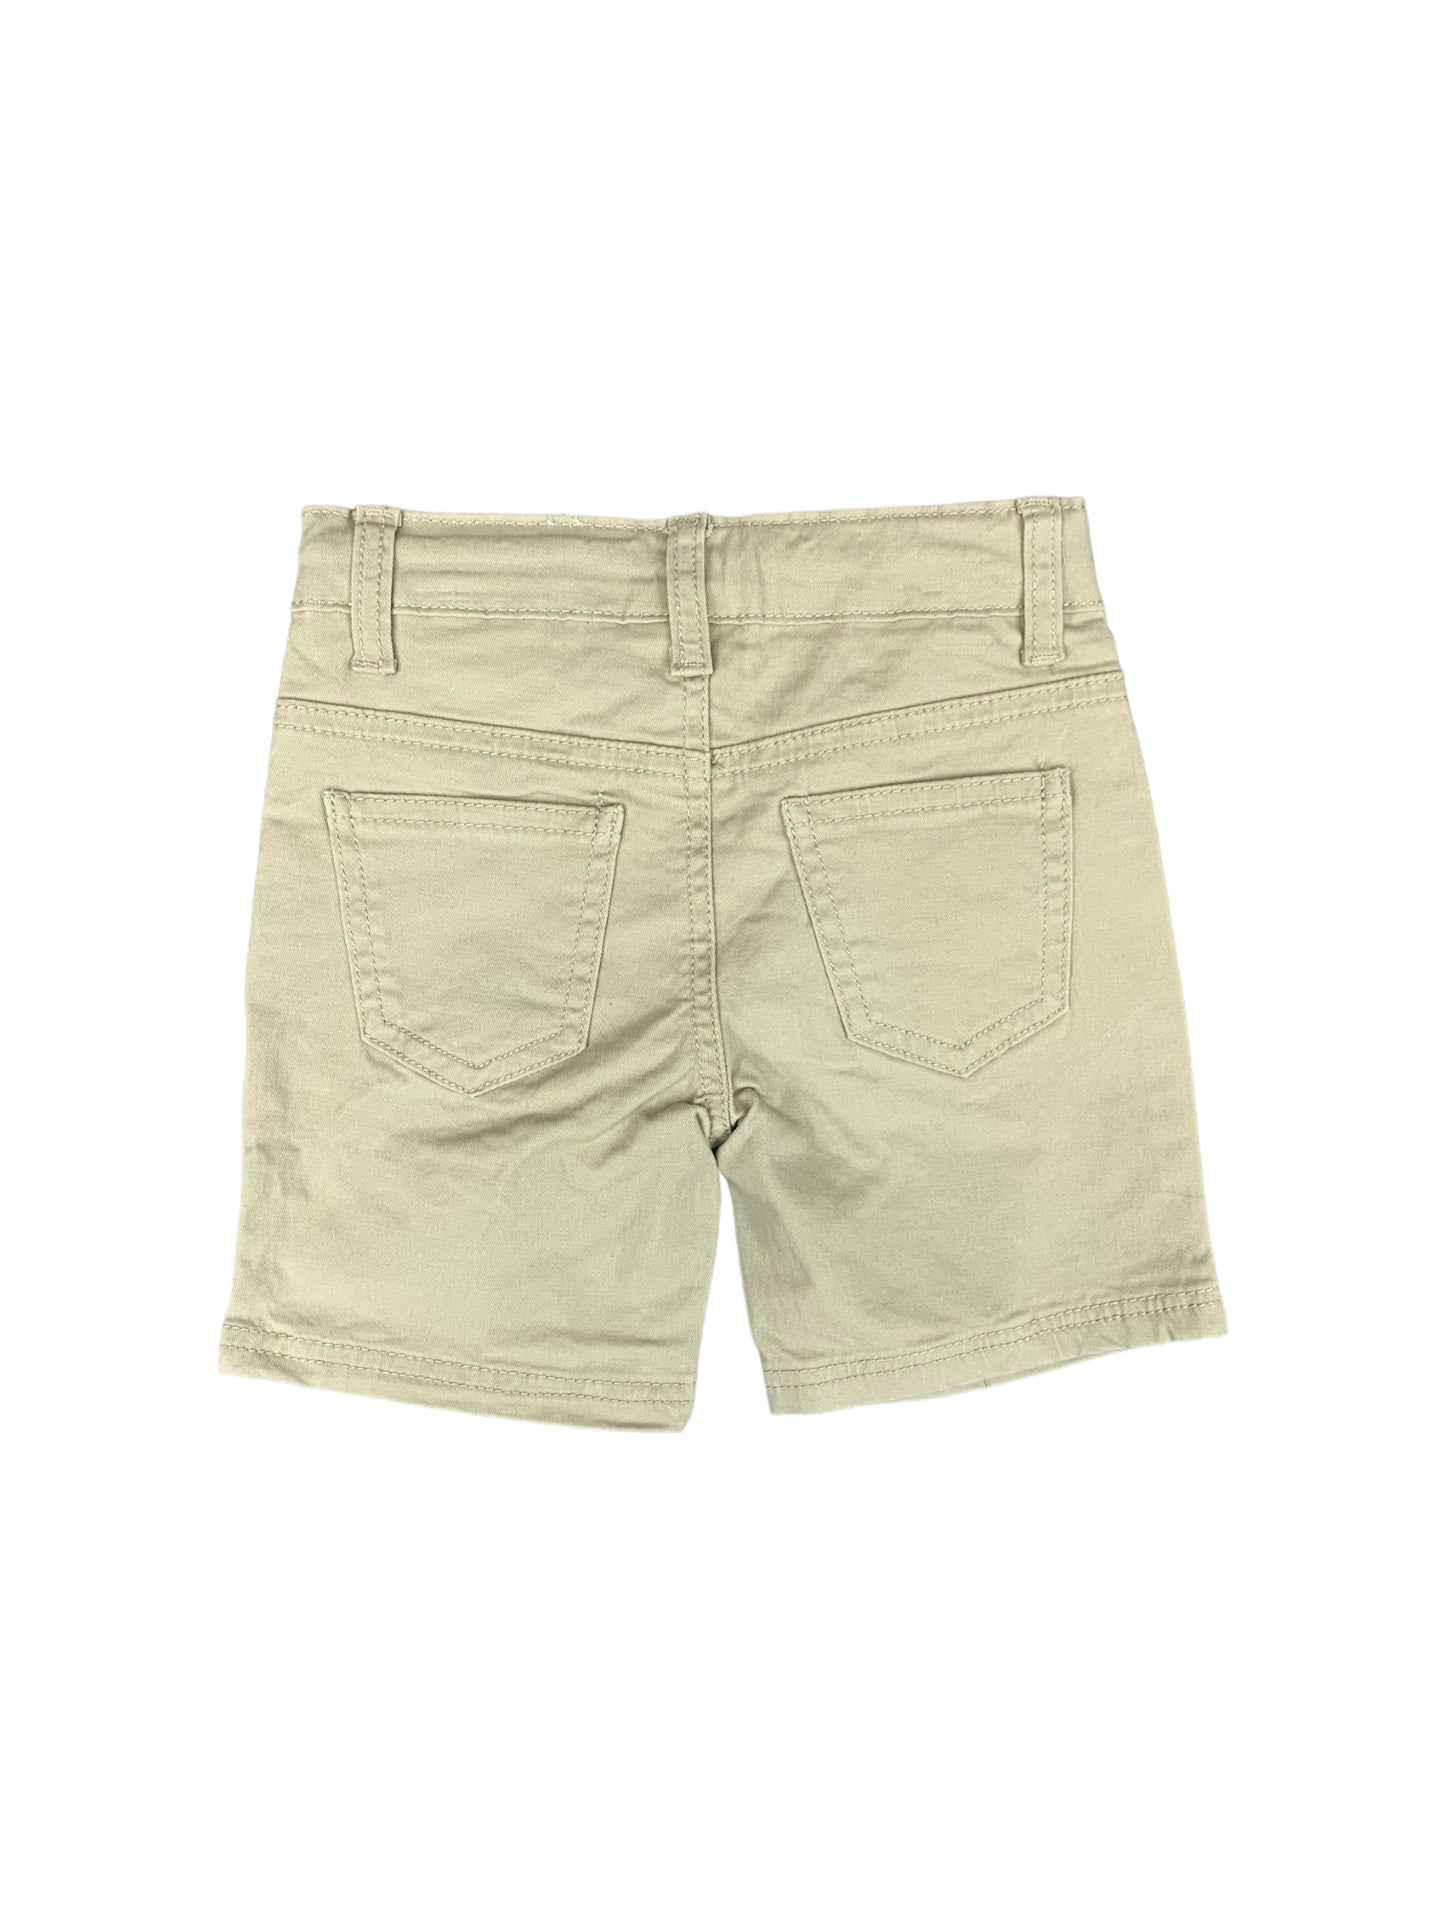 Beige bermuda shorts Northcoast for boys 2 to 7 years